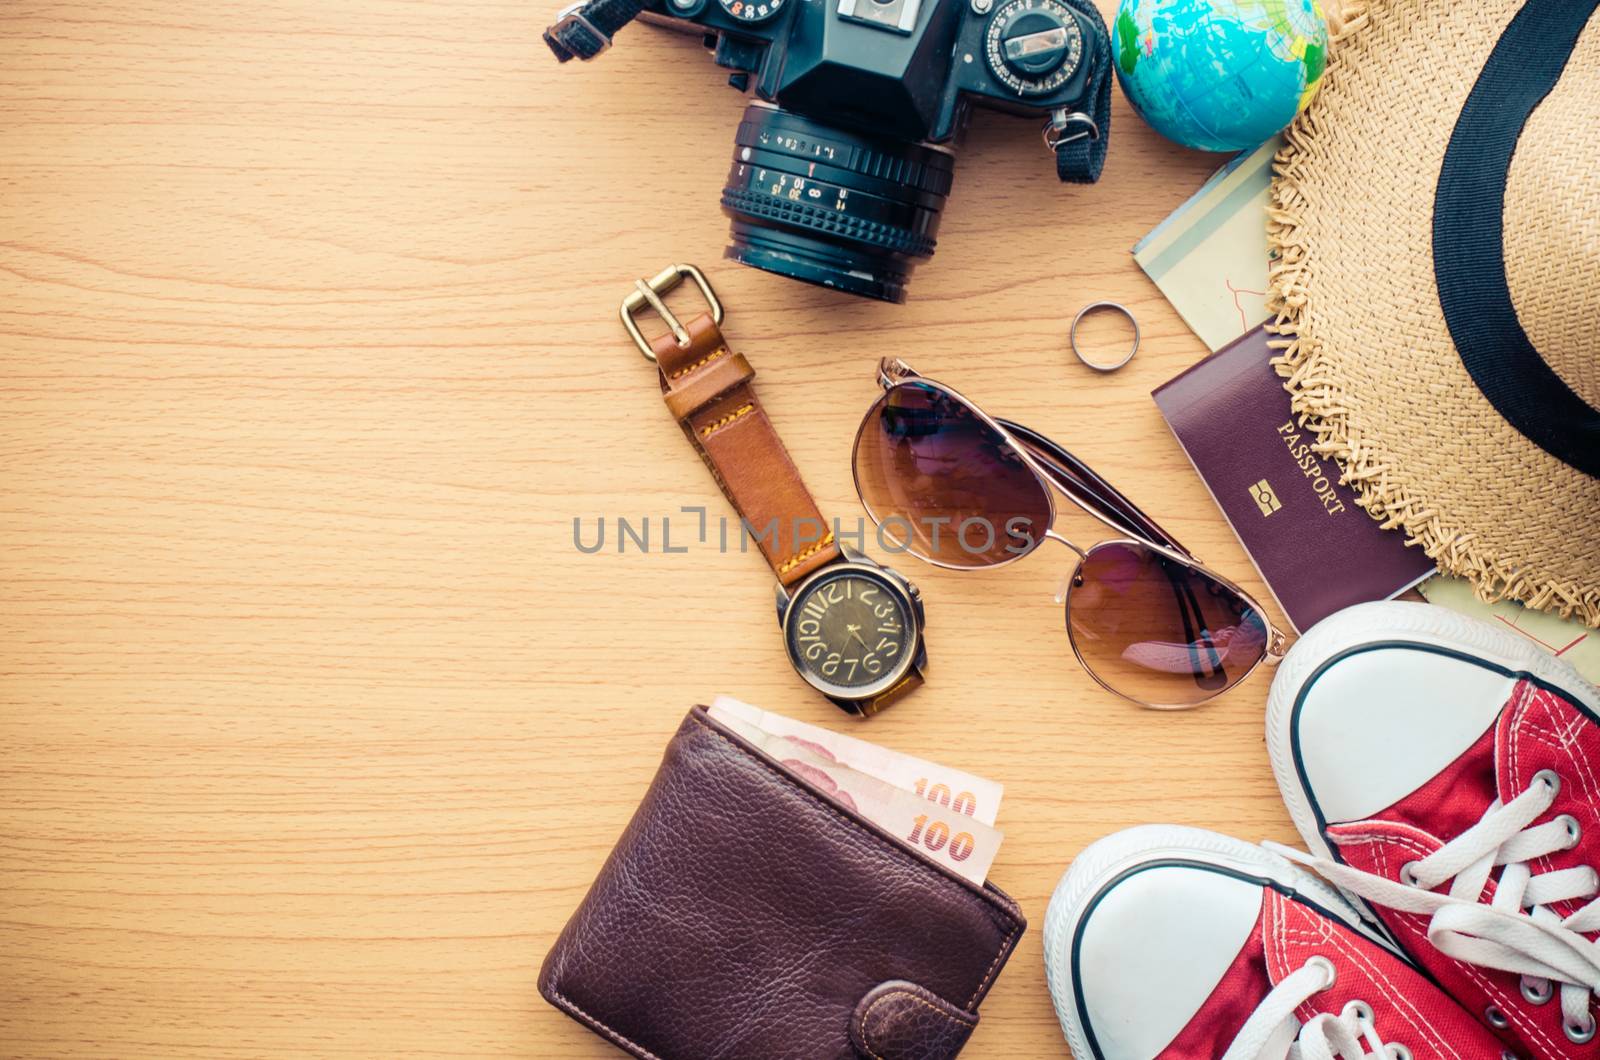 Travel accessories for trip